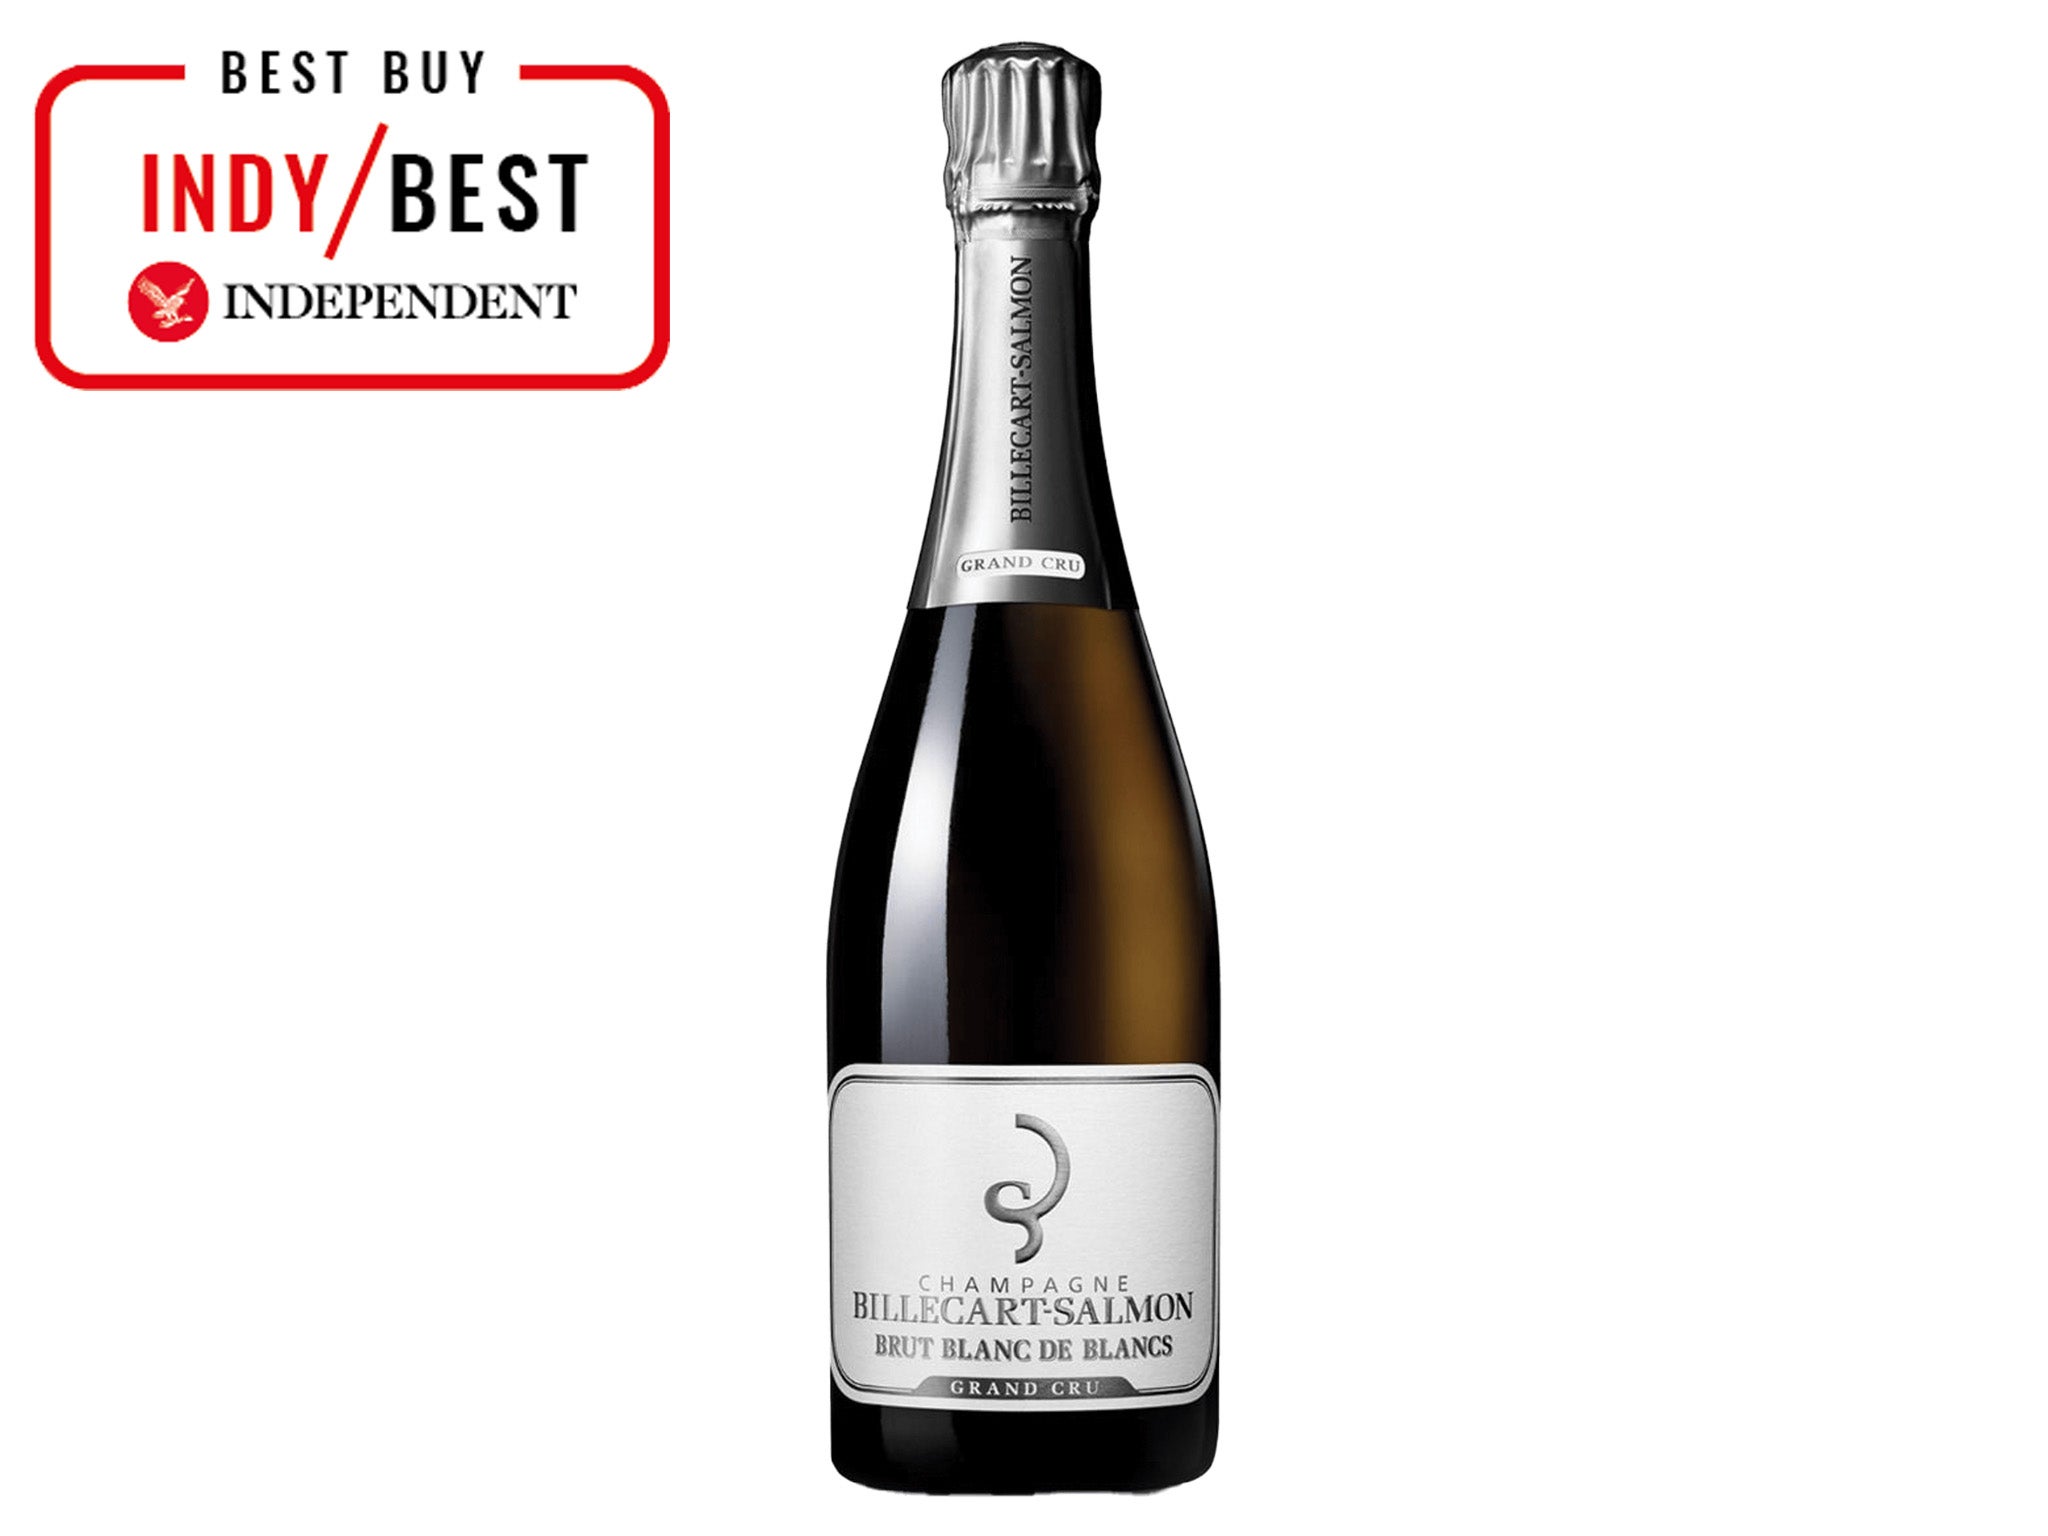 Billecart-Indybest-champagne-review